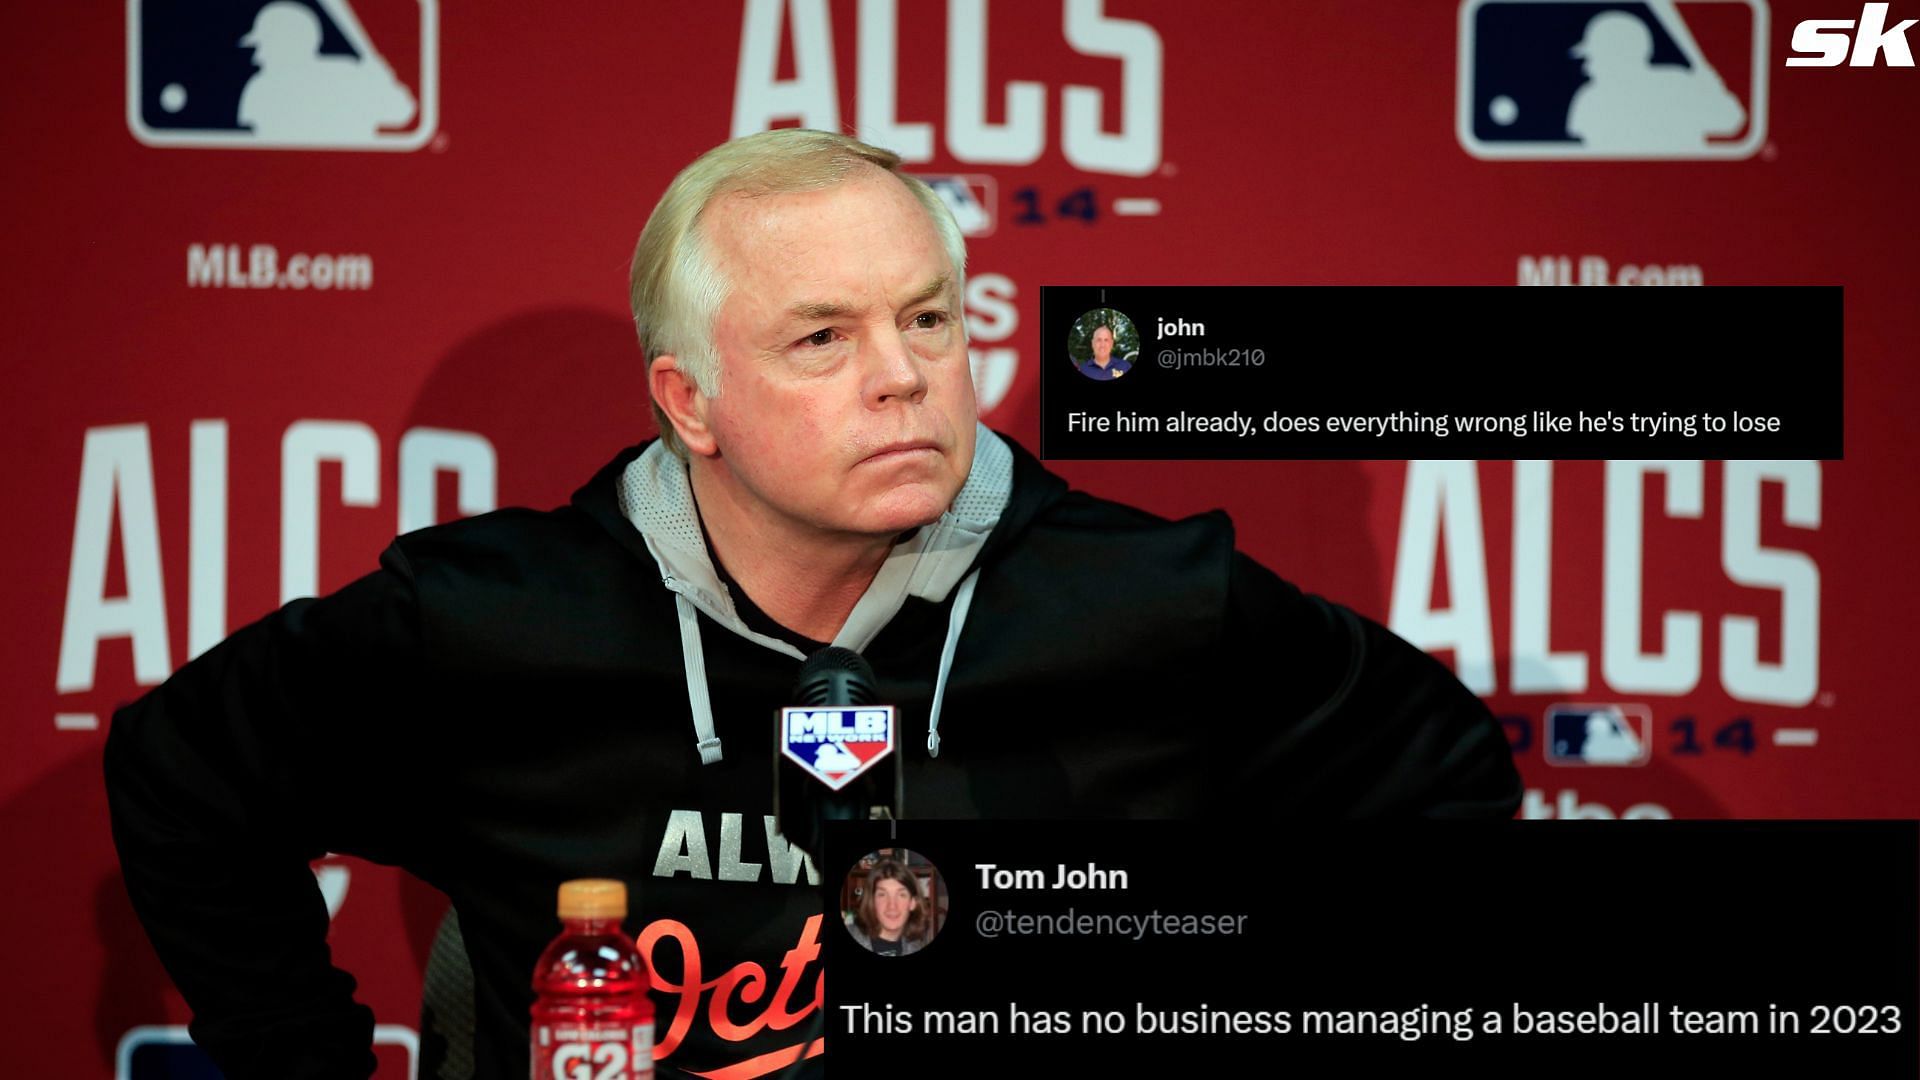 Buck Showalter #26 of the Baltimore Orioles speaks to the media after weather postponed Game Three of the American League Championship Series between the Baltimore Orioles and the Kansas City Royals at Kauffman Stadium on October 13, 2014 in Kansas City, Missouri.